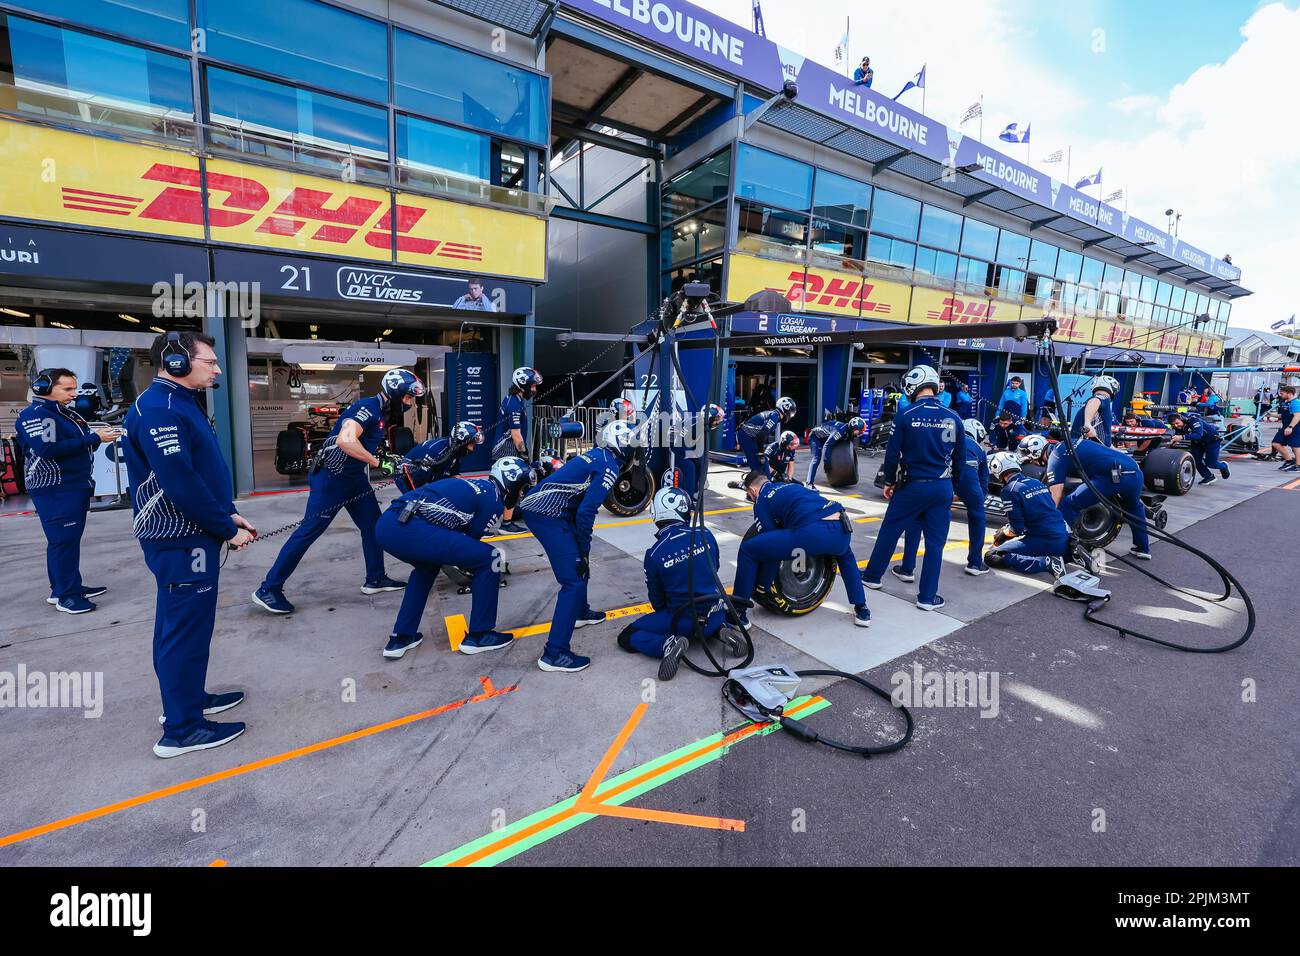 MELBOURNE, AUSTRALIA - MARCH 31: Atmosphere at the 2023 Australian Formula 1 Grand Prix on 31st March 2023 Stock Photo